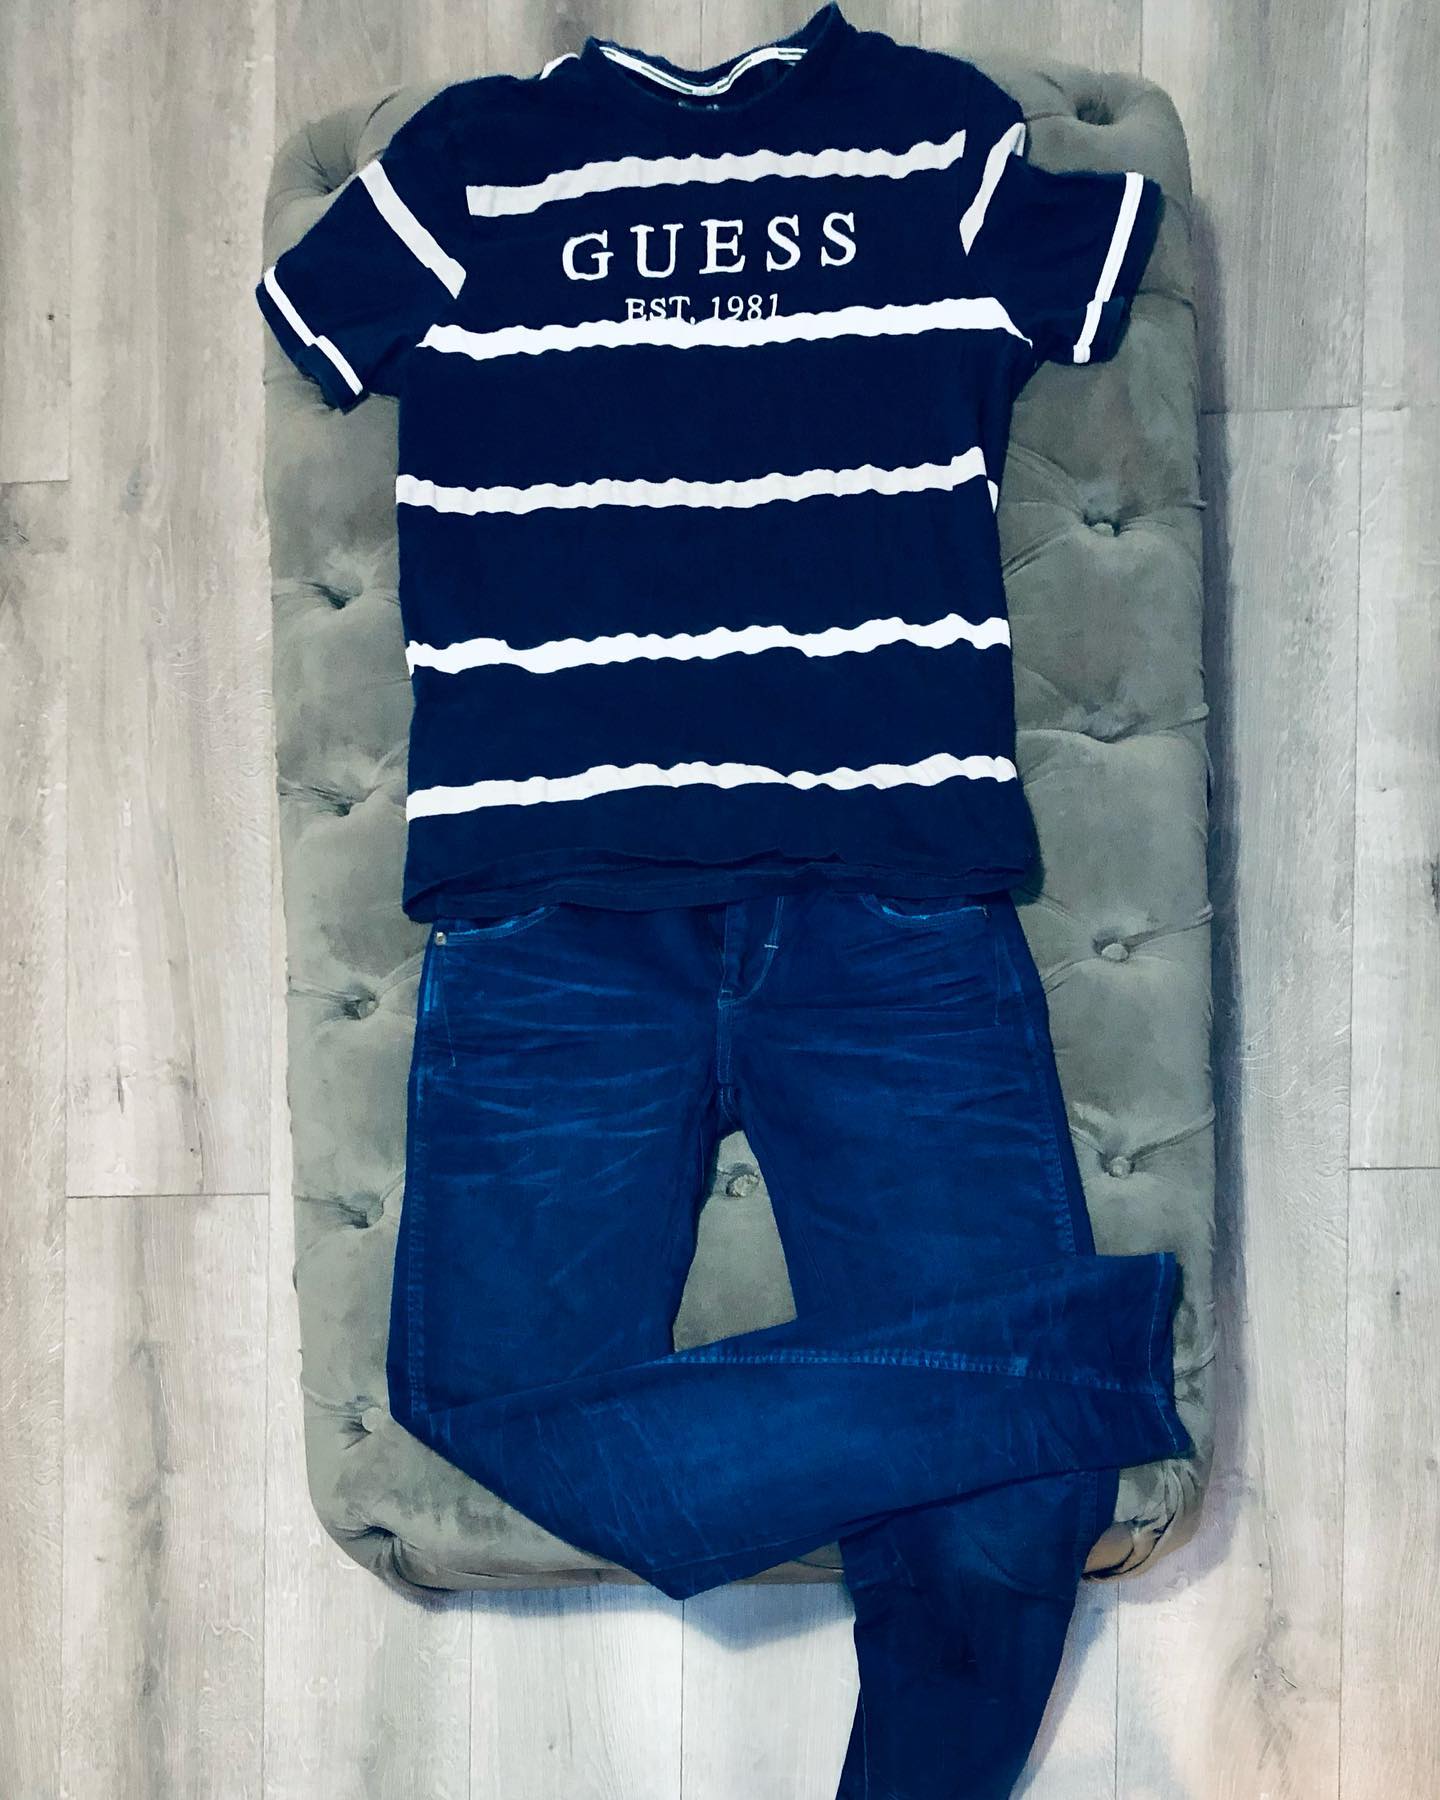 GUESS T SHIRT AND G STAR JEANS 
T SHIRT size s
JEANS 30 reg